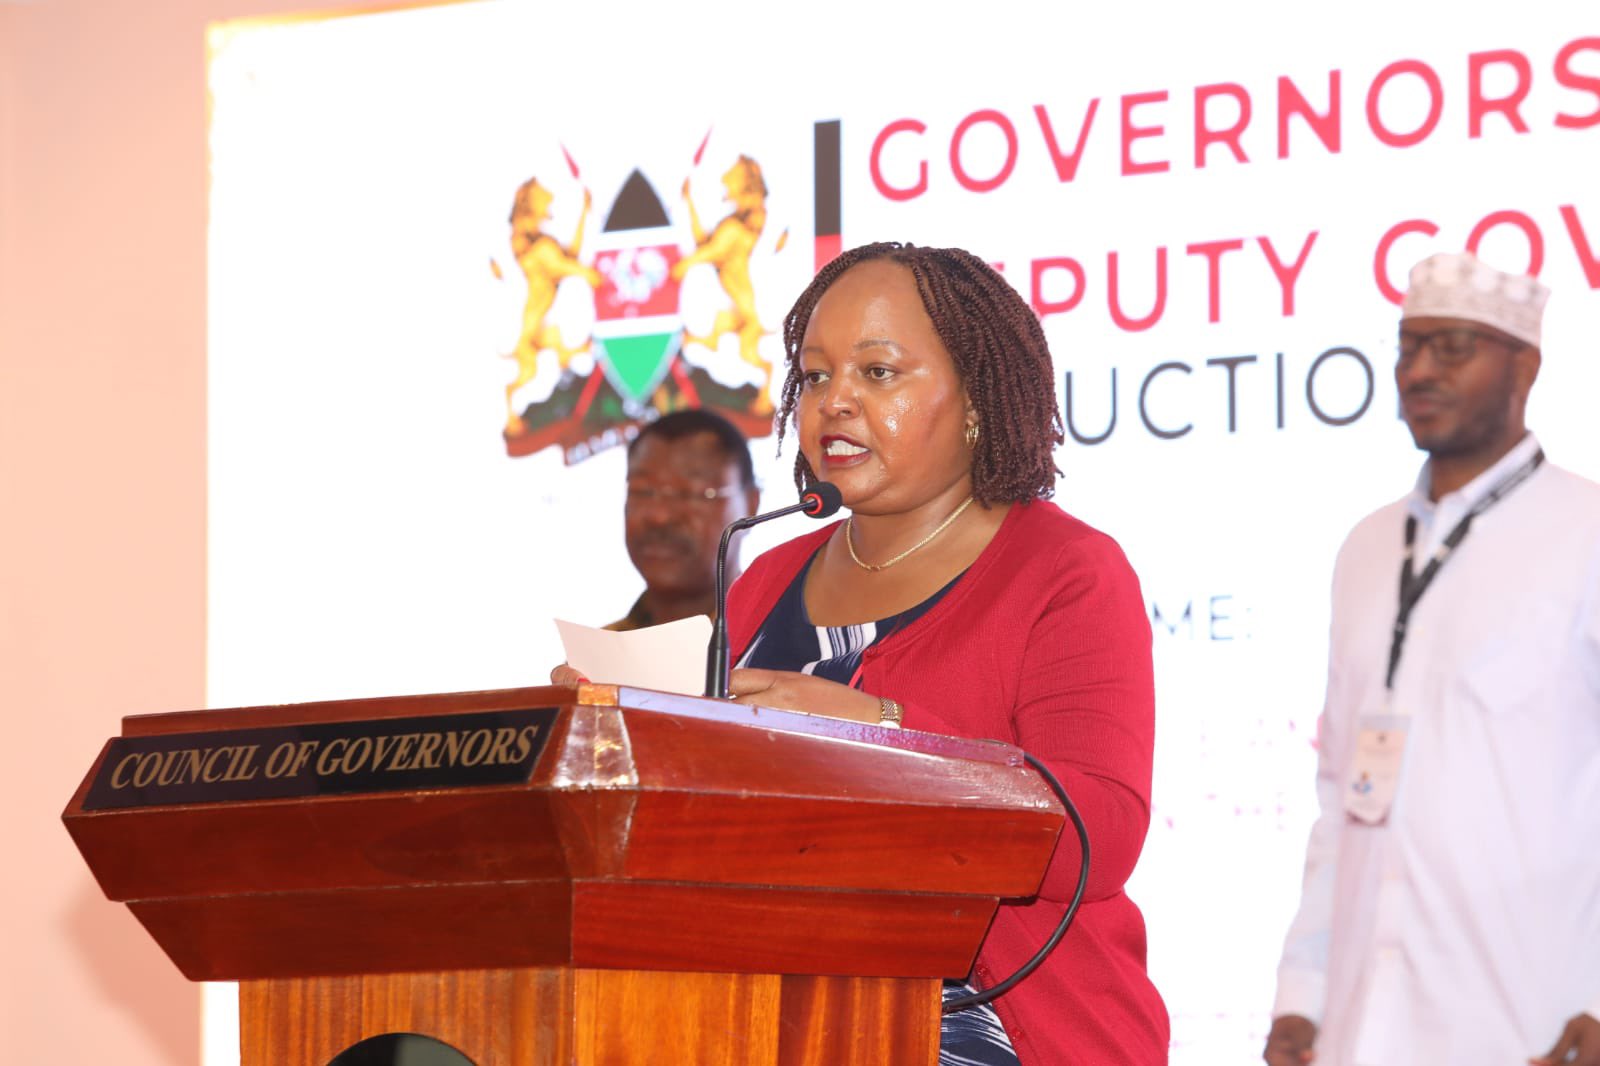 Anne Waiguru Elected as Council of Governors Chair